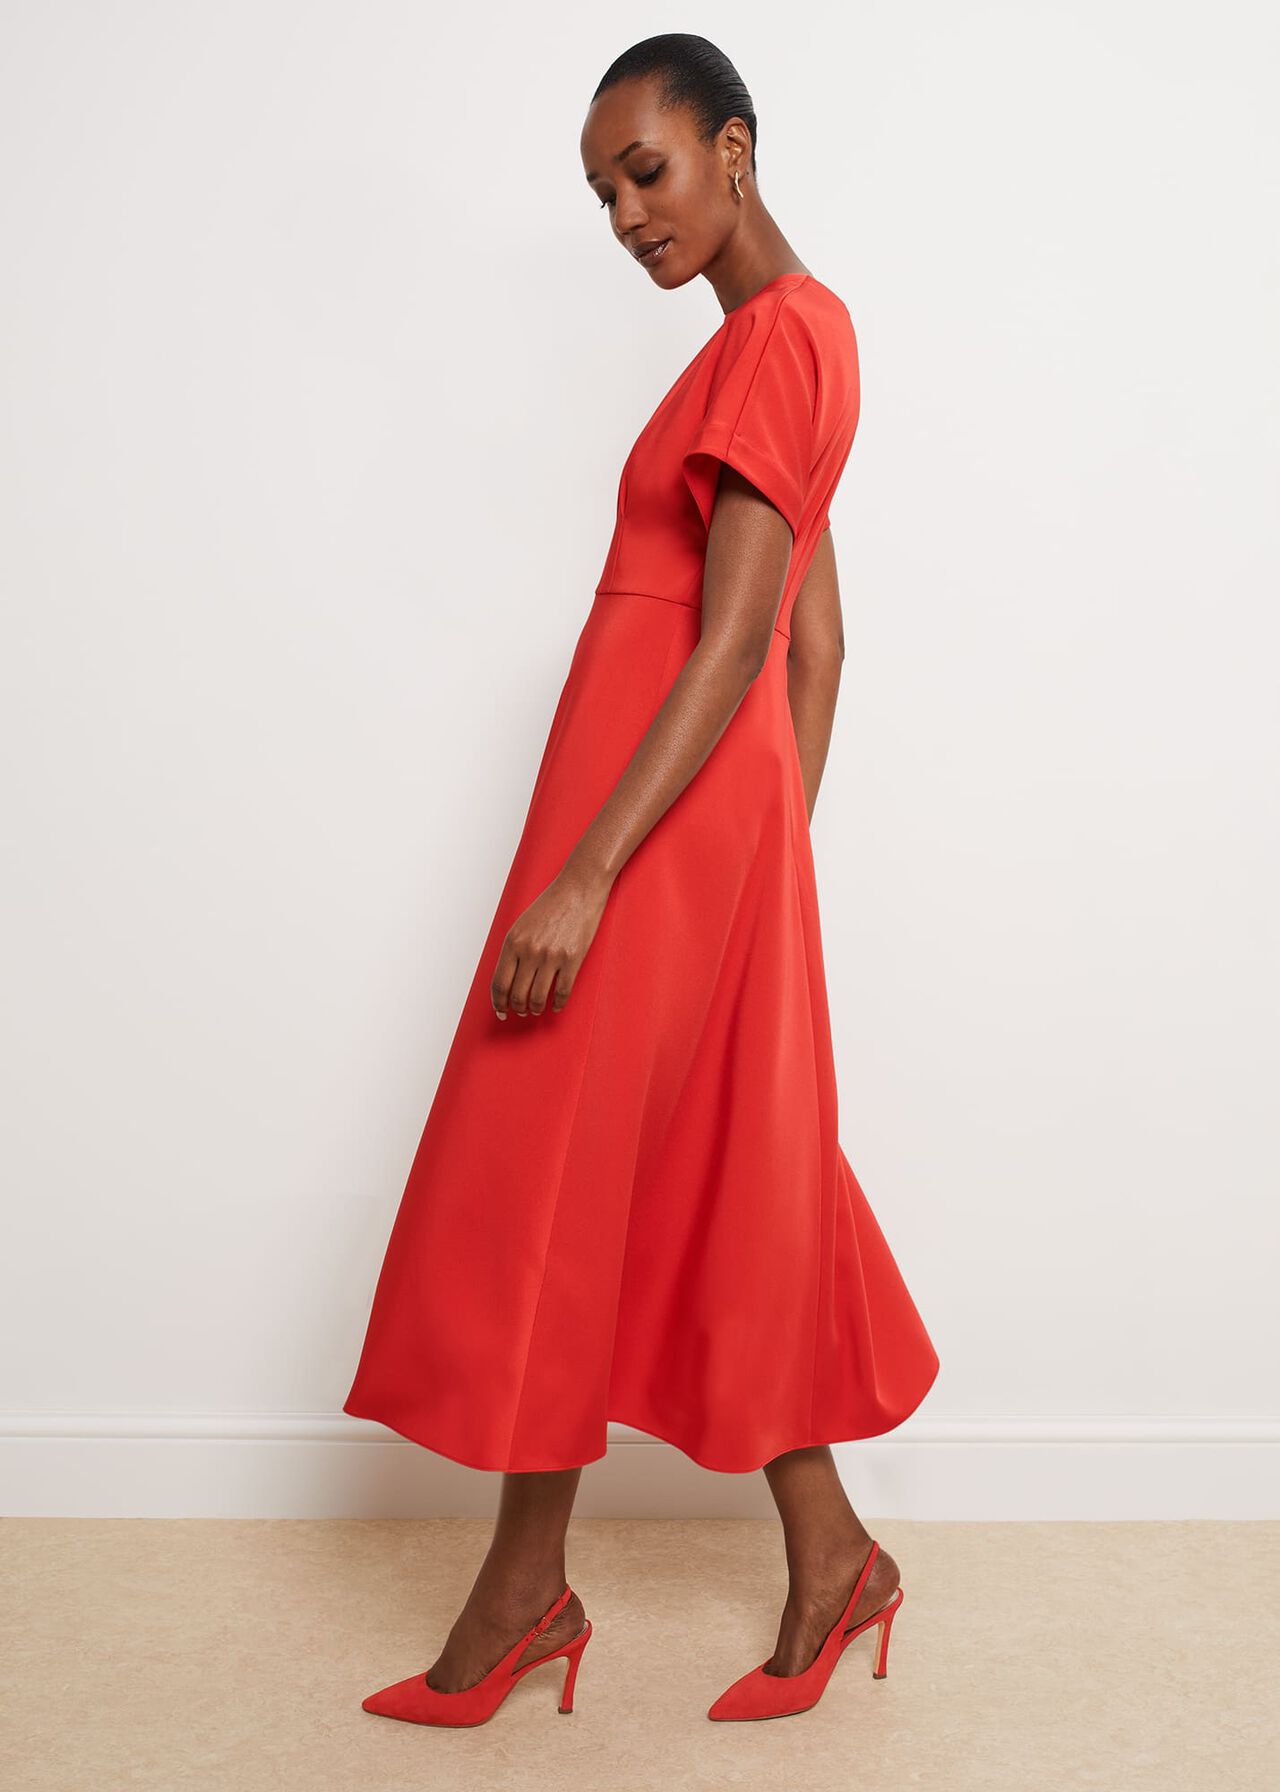 Radclyffe Fit And Flare Dress, True Red, hi-res